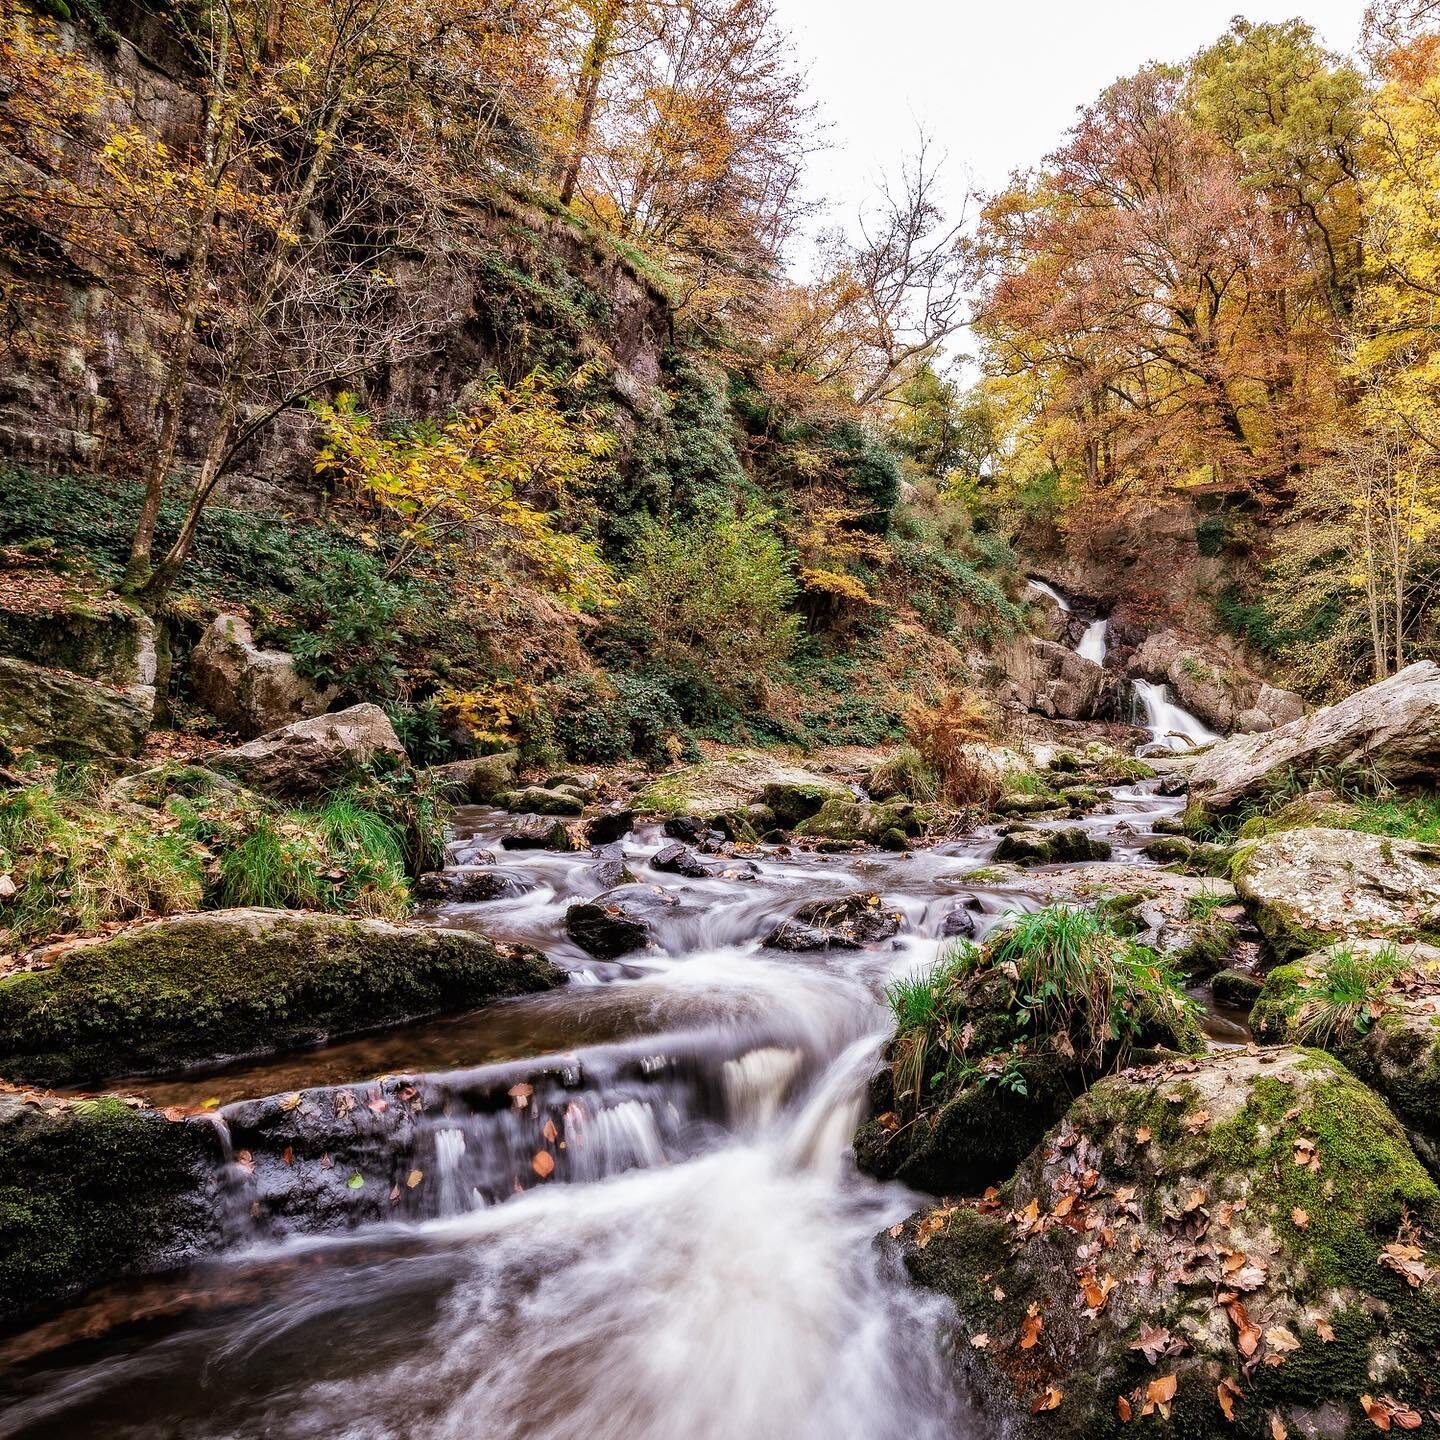 La grande cascade de Mortain; the biggest waterfall of North-West France. And one of the many lovely areas to take an Autumn walk🍂

.
.
.
.
#frenchcountryside #campagne #rural_nature_landscape #manchetourisme #normandietourisme #jaimelanormandie#unl